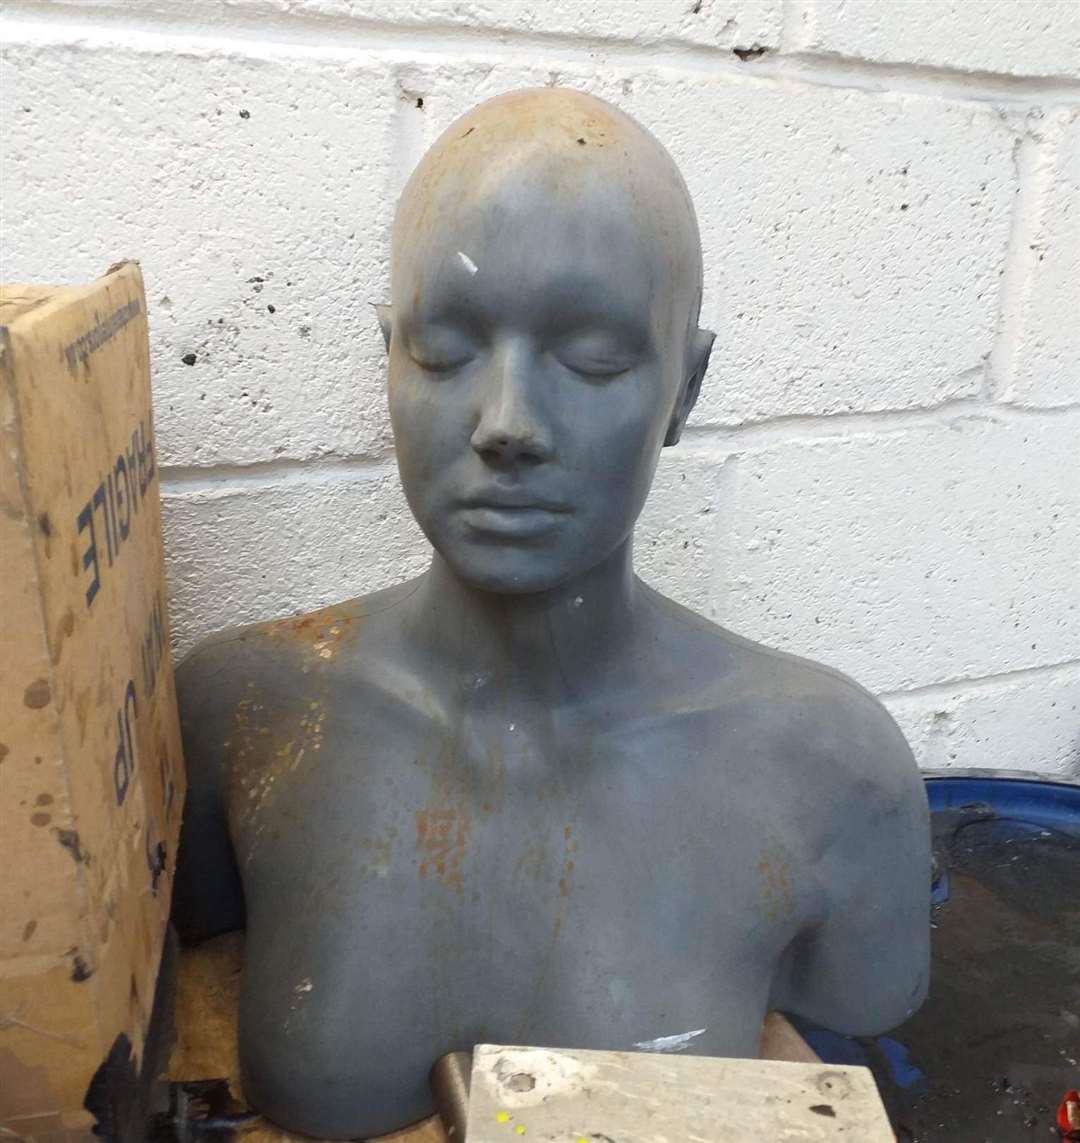 Two unique busts like the one pictured were stolen from the Westgate-On-Sea business